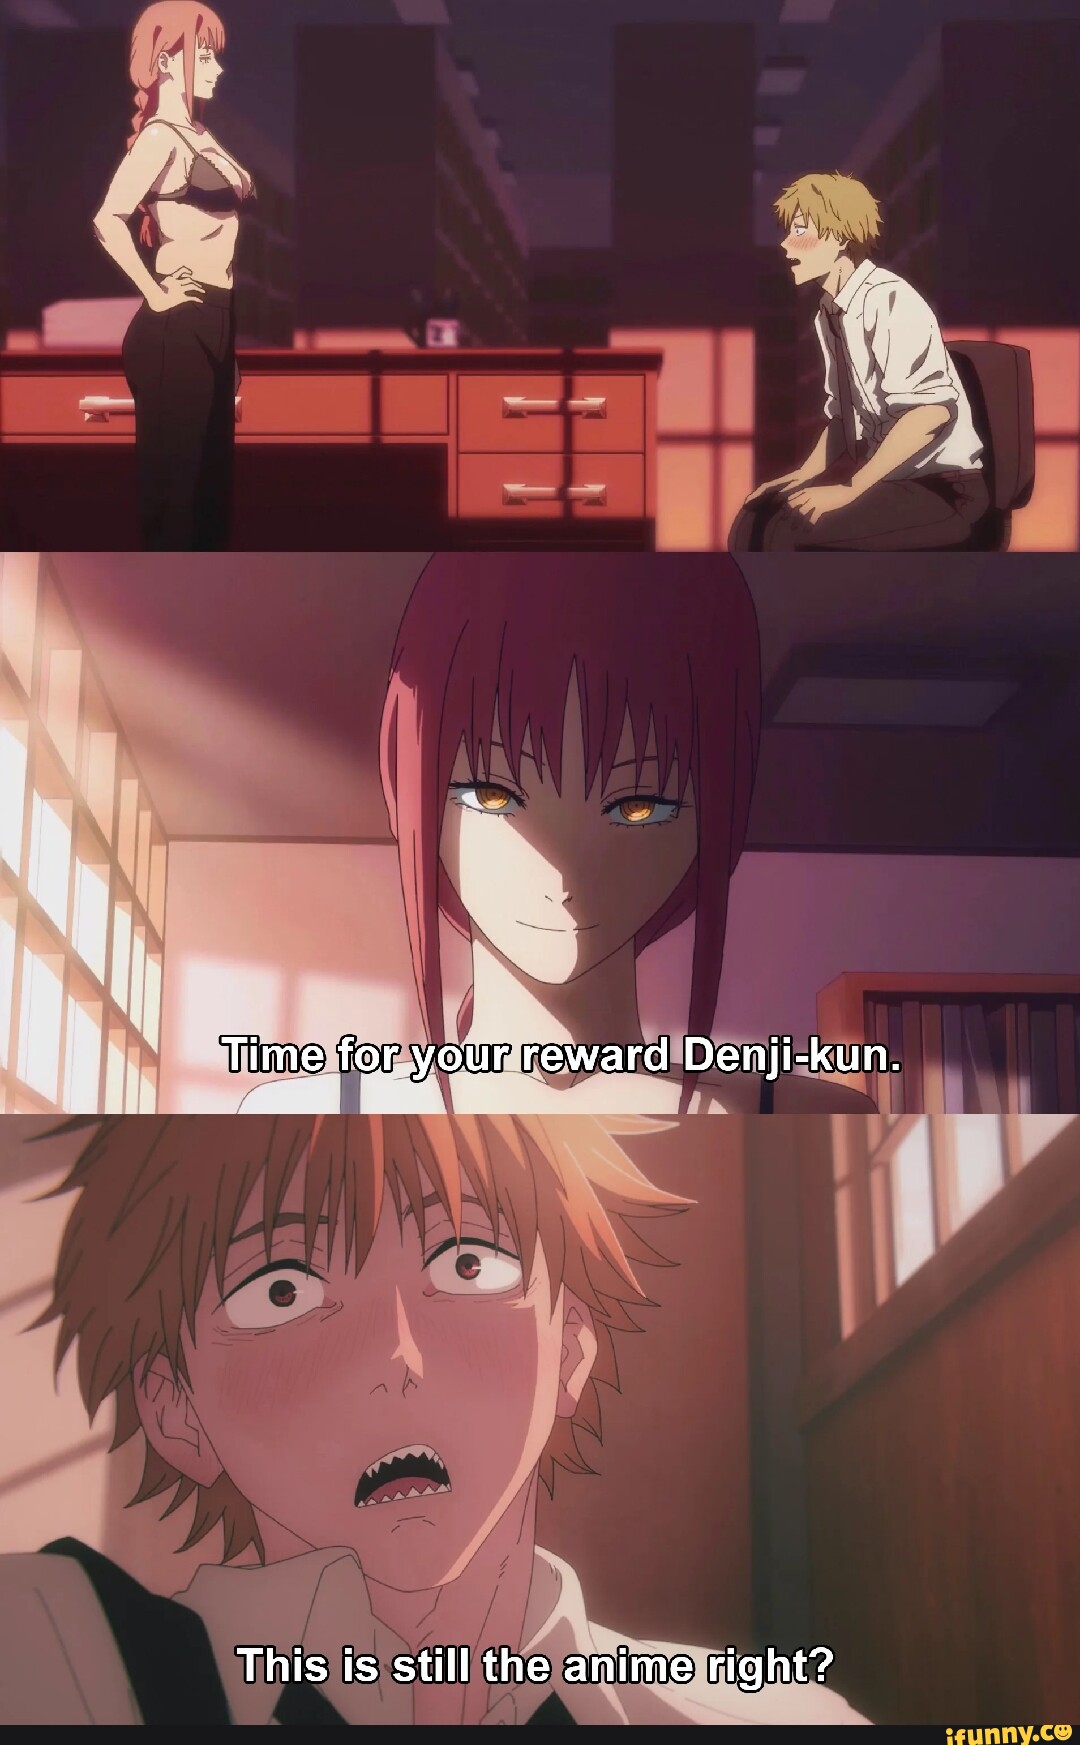 Time for your reward Denji-kun. This is still the anime right? - iFunny